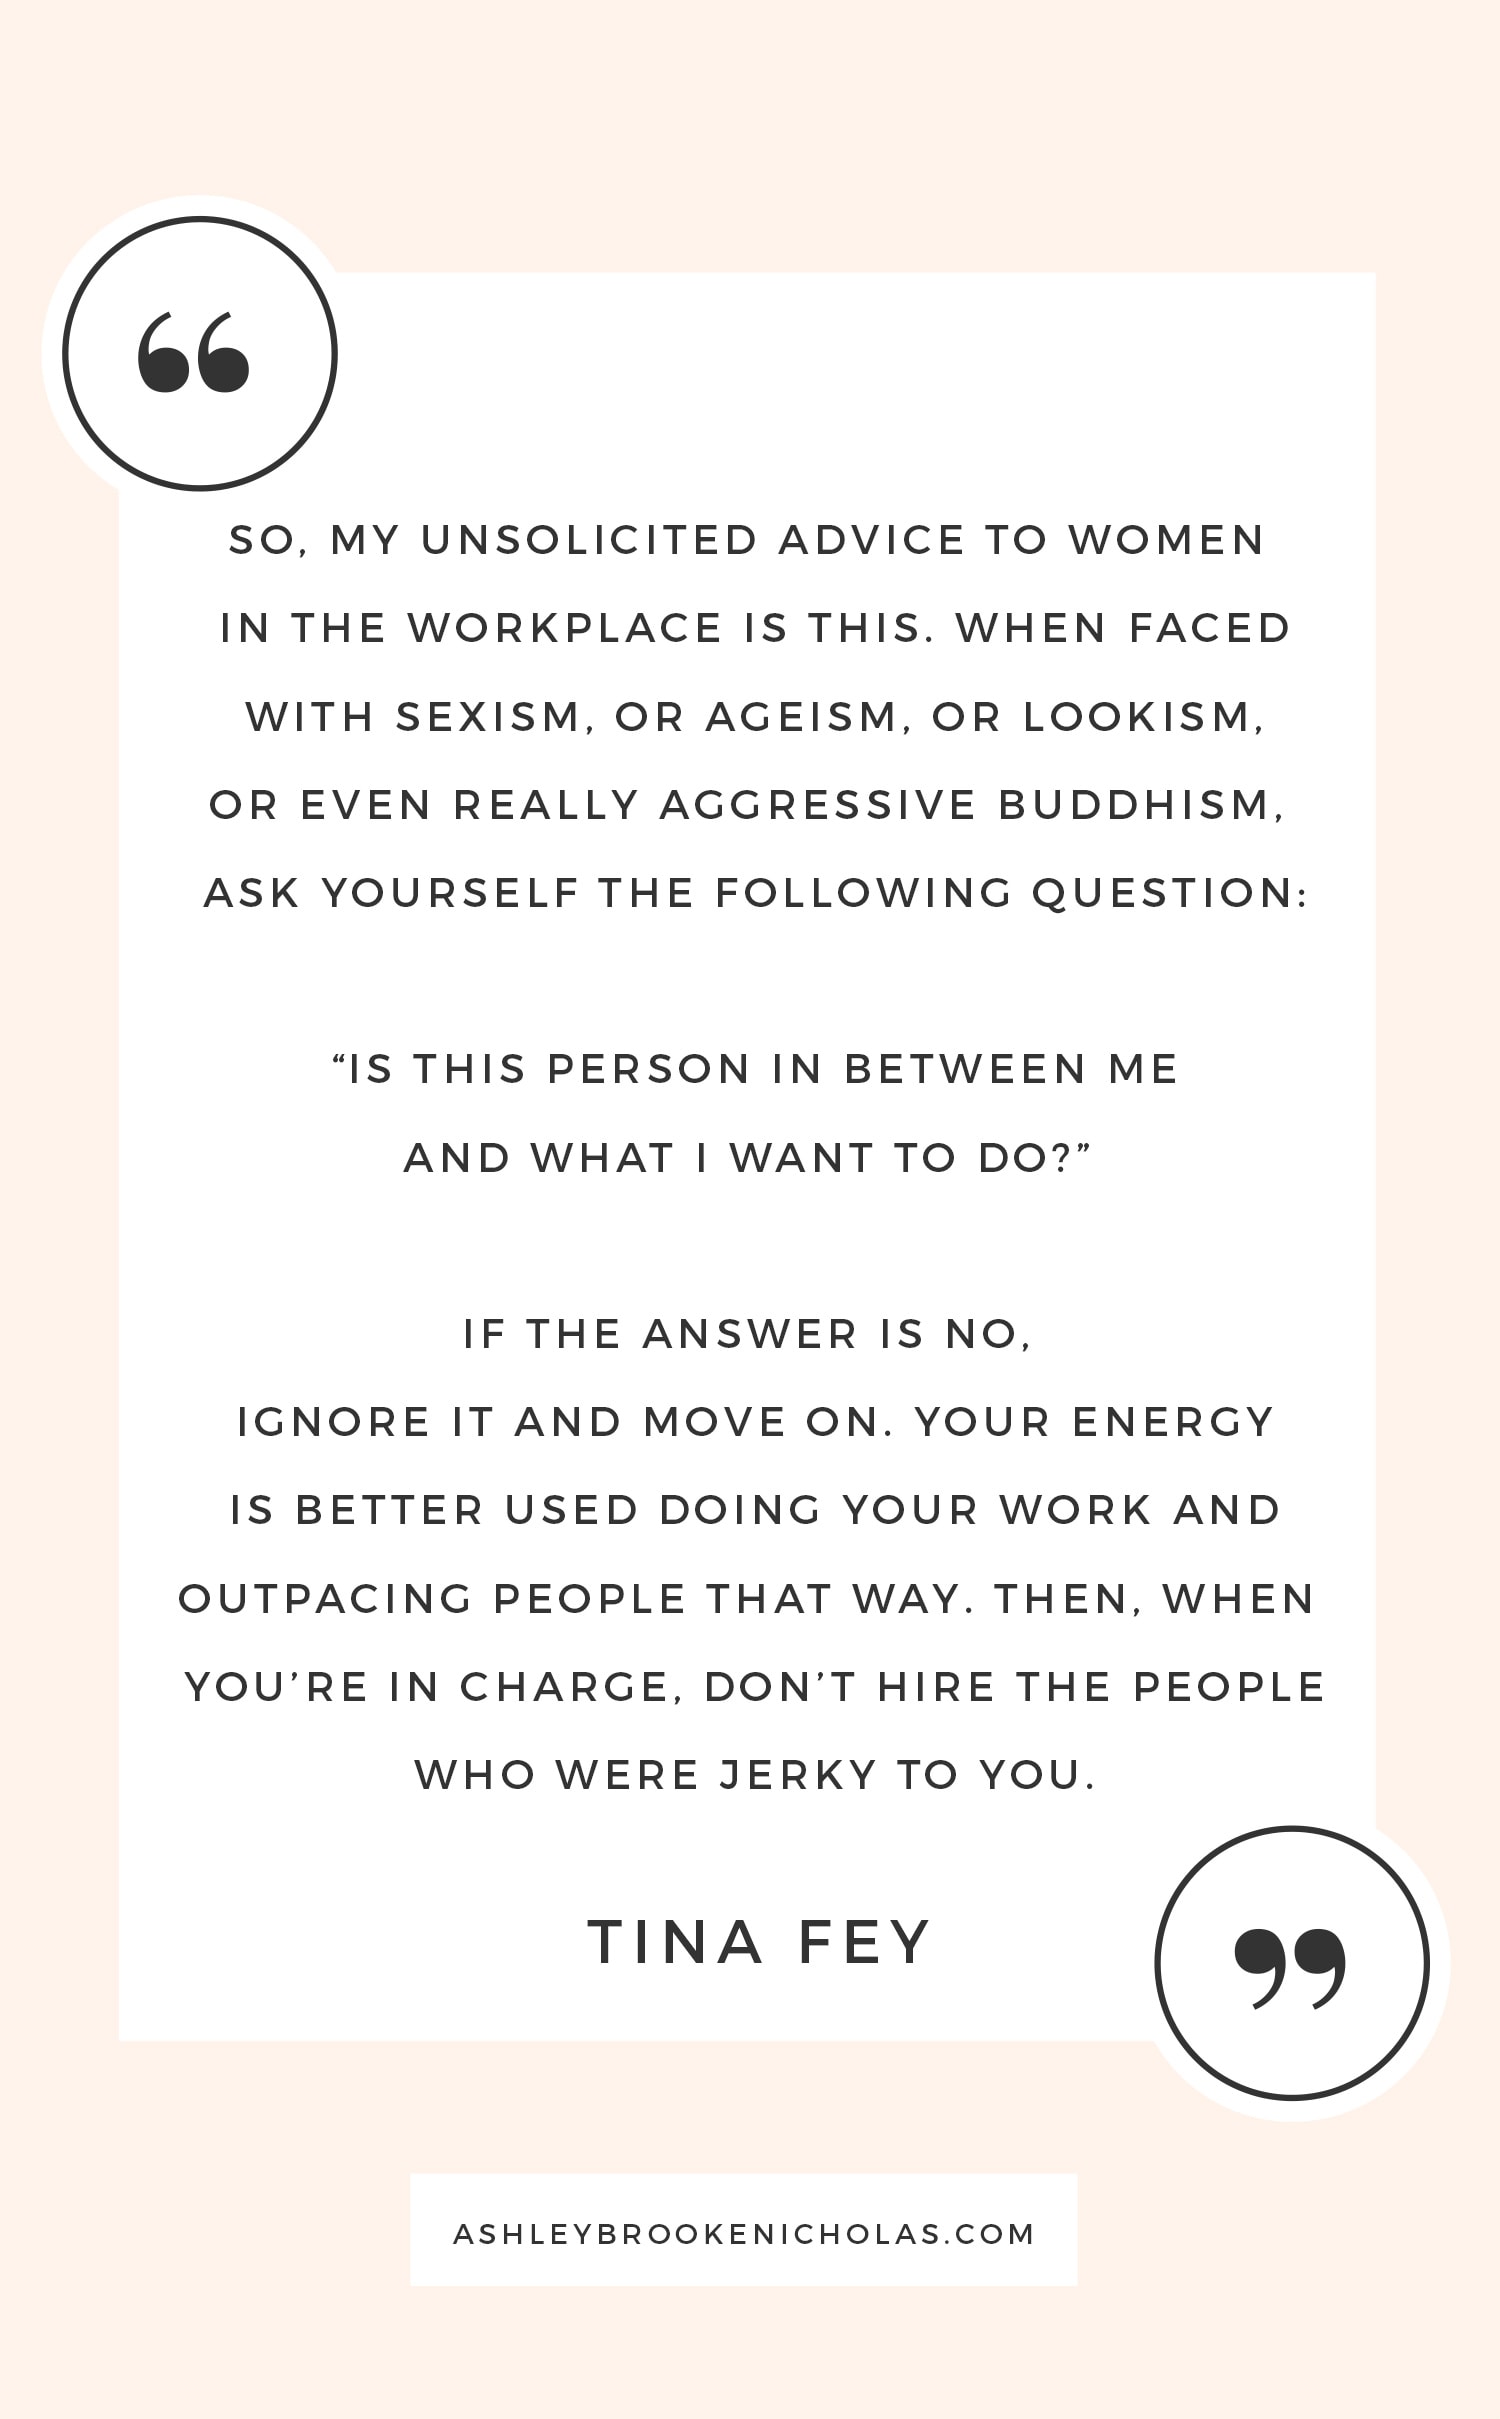 The Best Tina Fey and Amy Poehler quotes | "So, my unsolicited advice to women in the workplace is this. When faced with sexism, or ageism, or lookism, or even really aggressive buddhism, ask yourself the following question: 'Is this person in between me and what I want to do?' If the answer is no, ignore it and move on. Your energy is better used doing your work and outpacing people that way, then, when you're in charge, don't hire the people who were jerky to you."